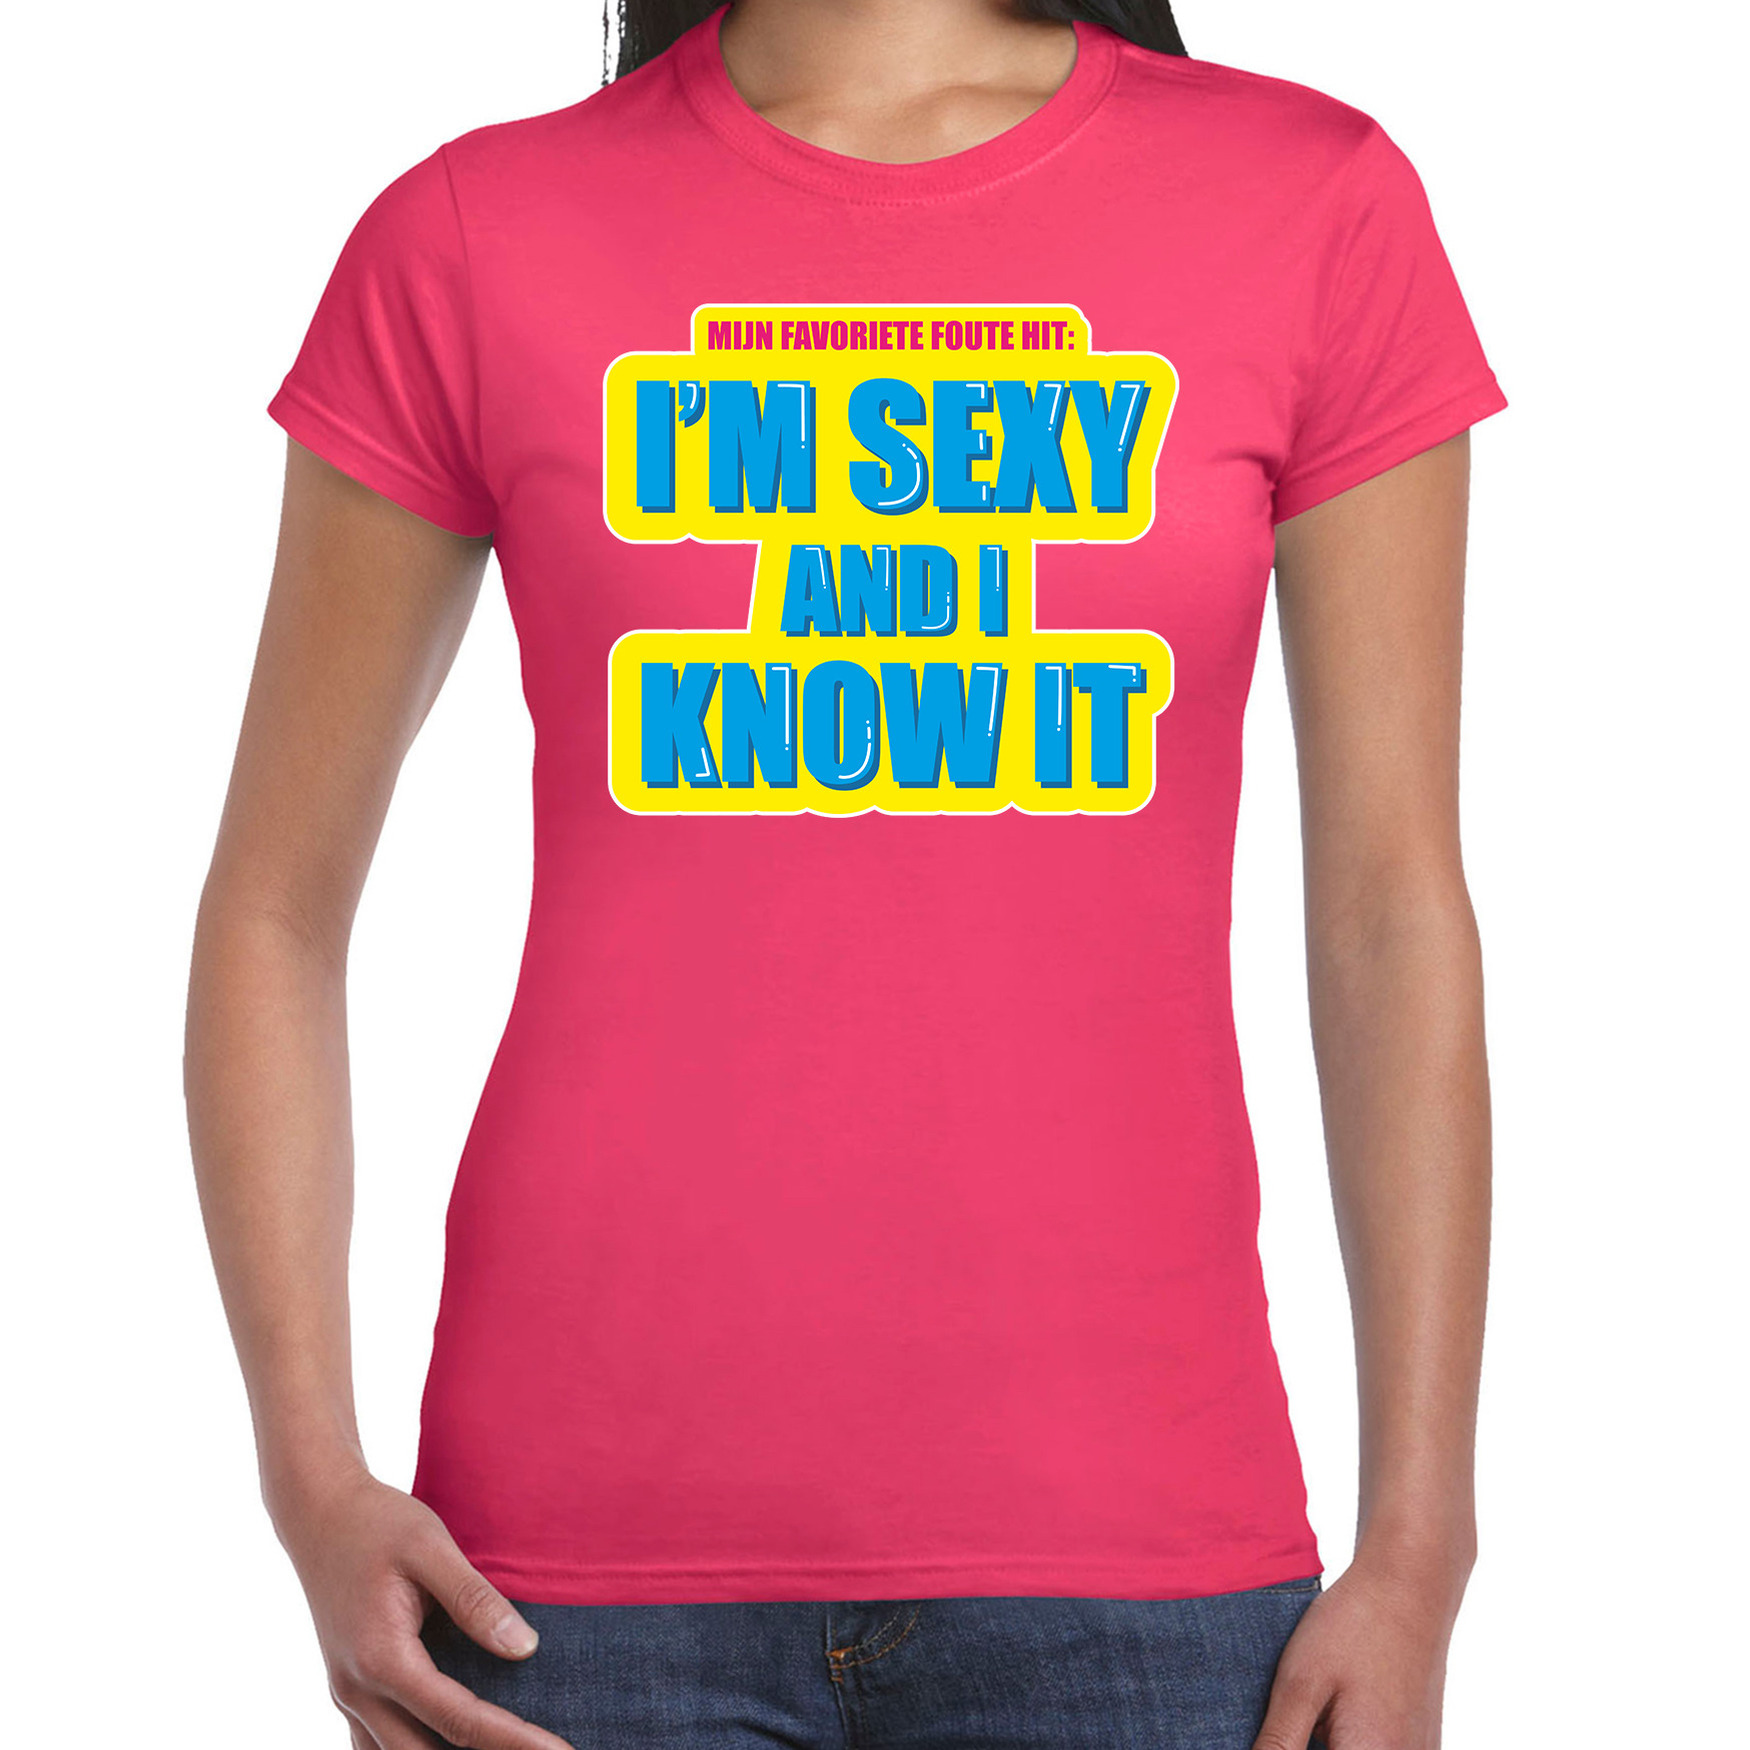 Foute party I m sexy and i know it verkleed t-shirt roze dames Foute party hits outfit- kleding